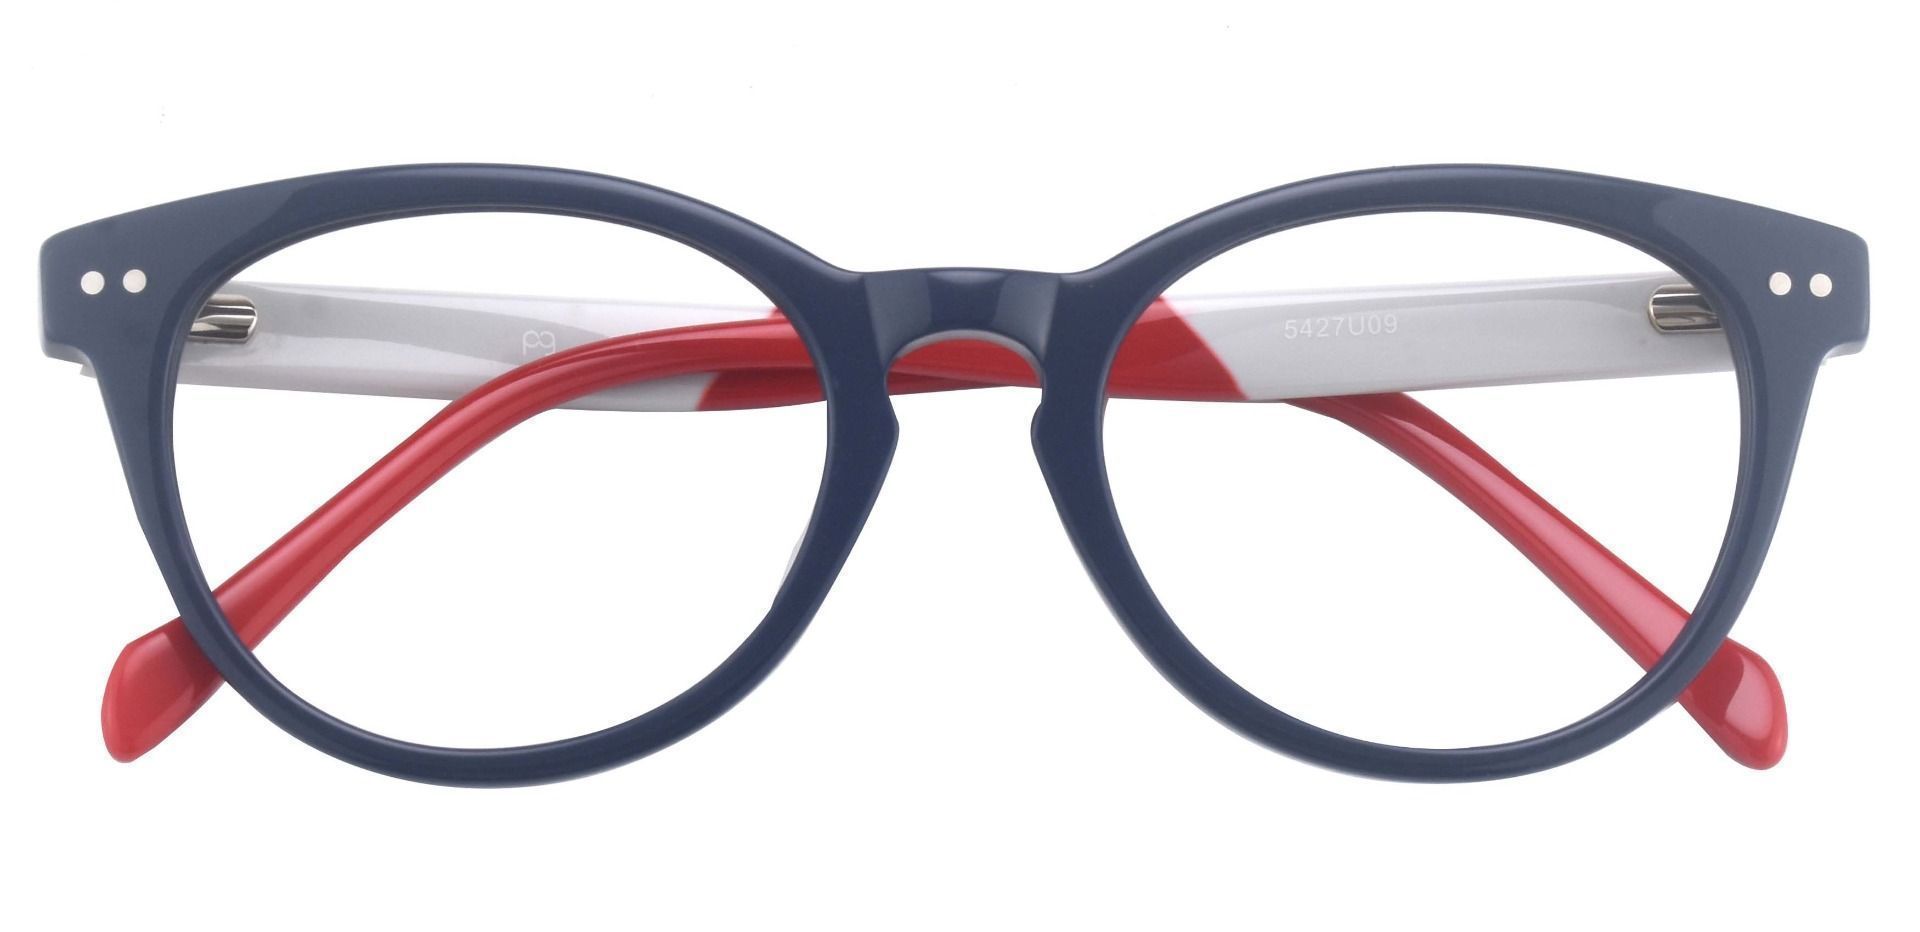 Revere Oval Non-Rx Glasses - The Frame Is Blue And Red